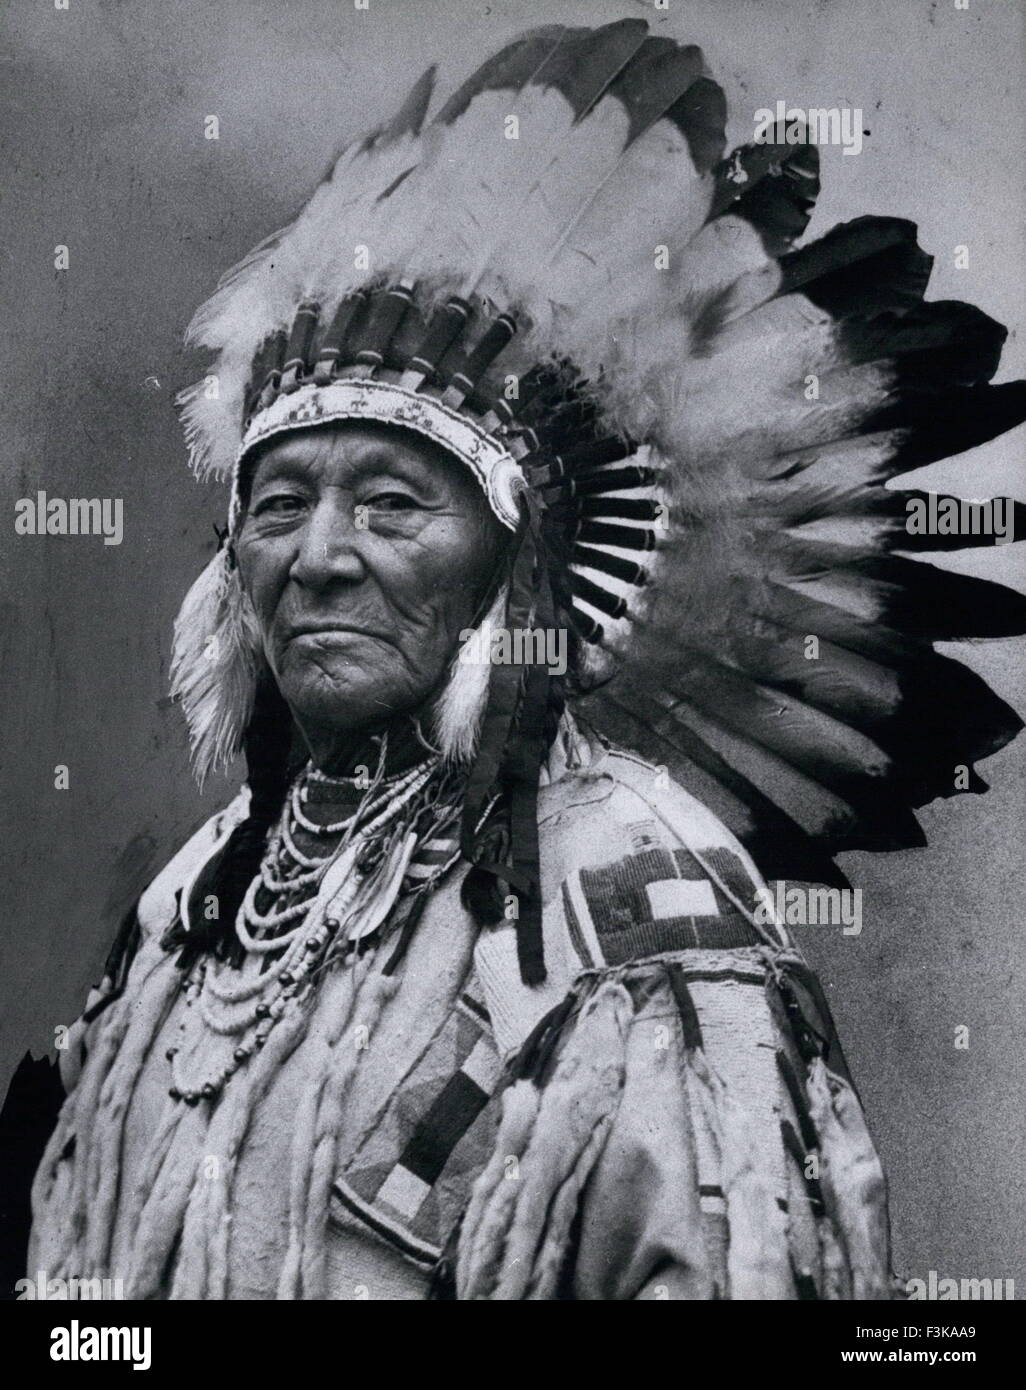 1925 - Chief Plenty of the Crow Indians after visiting President ...